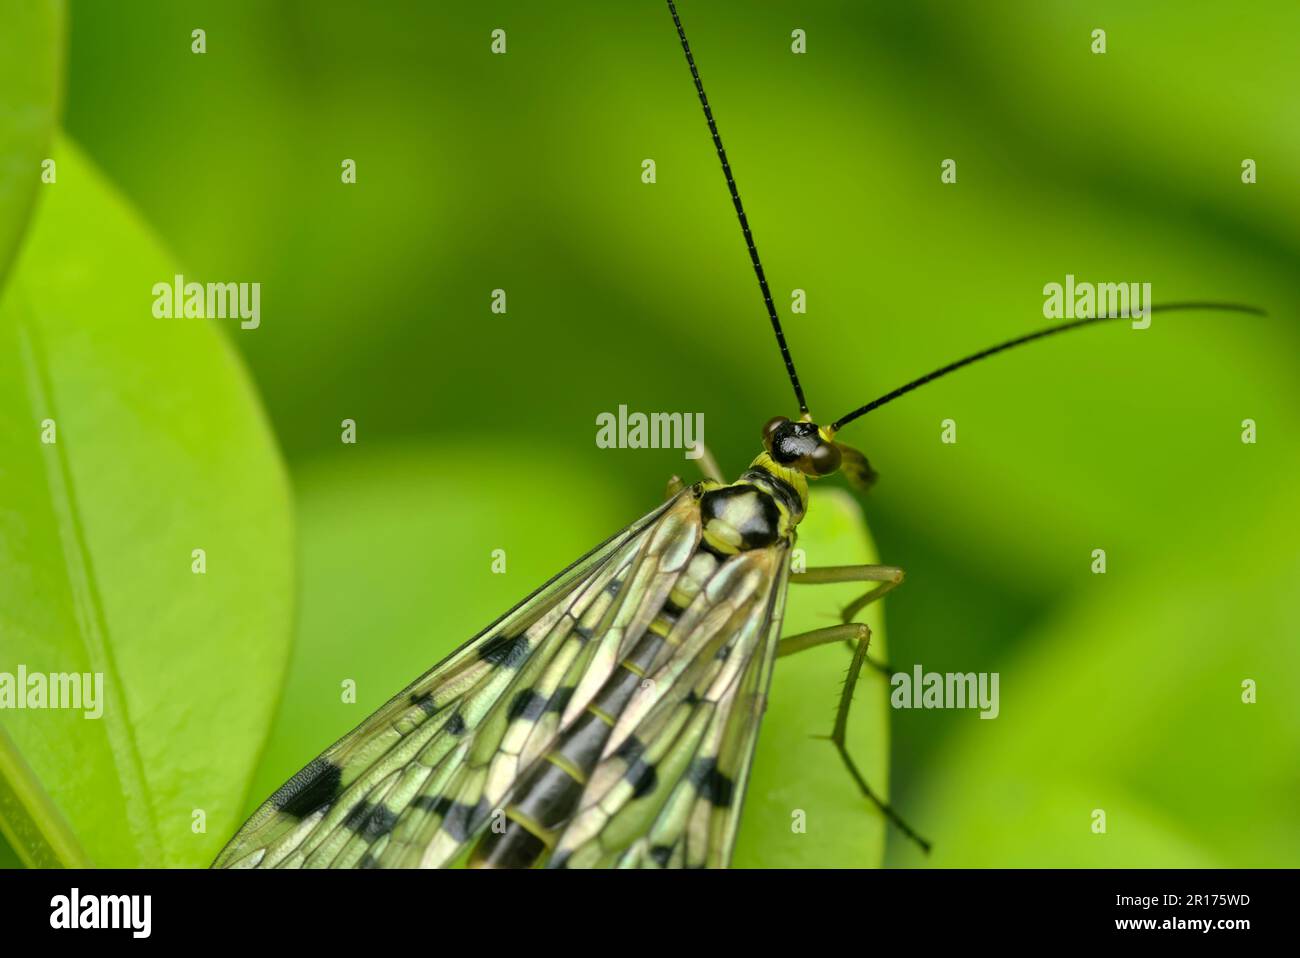 Single Common scorpionfly (Panorpa communis) sitting on a leaf, resting, Insects, macro photography, biodiversity, entomology Stock Photo